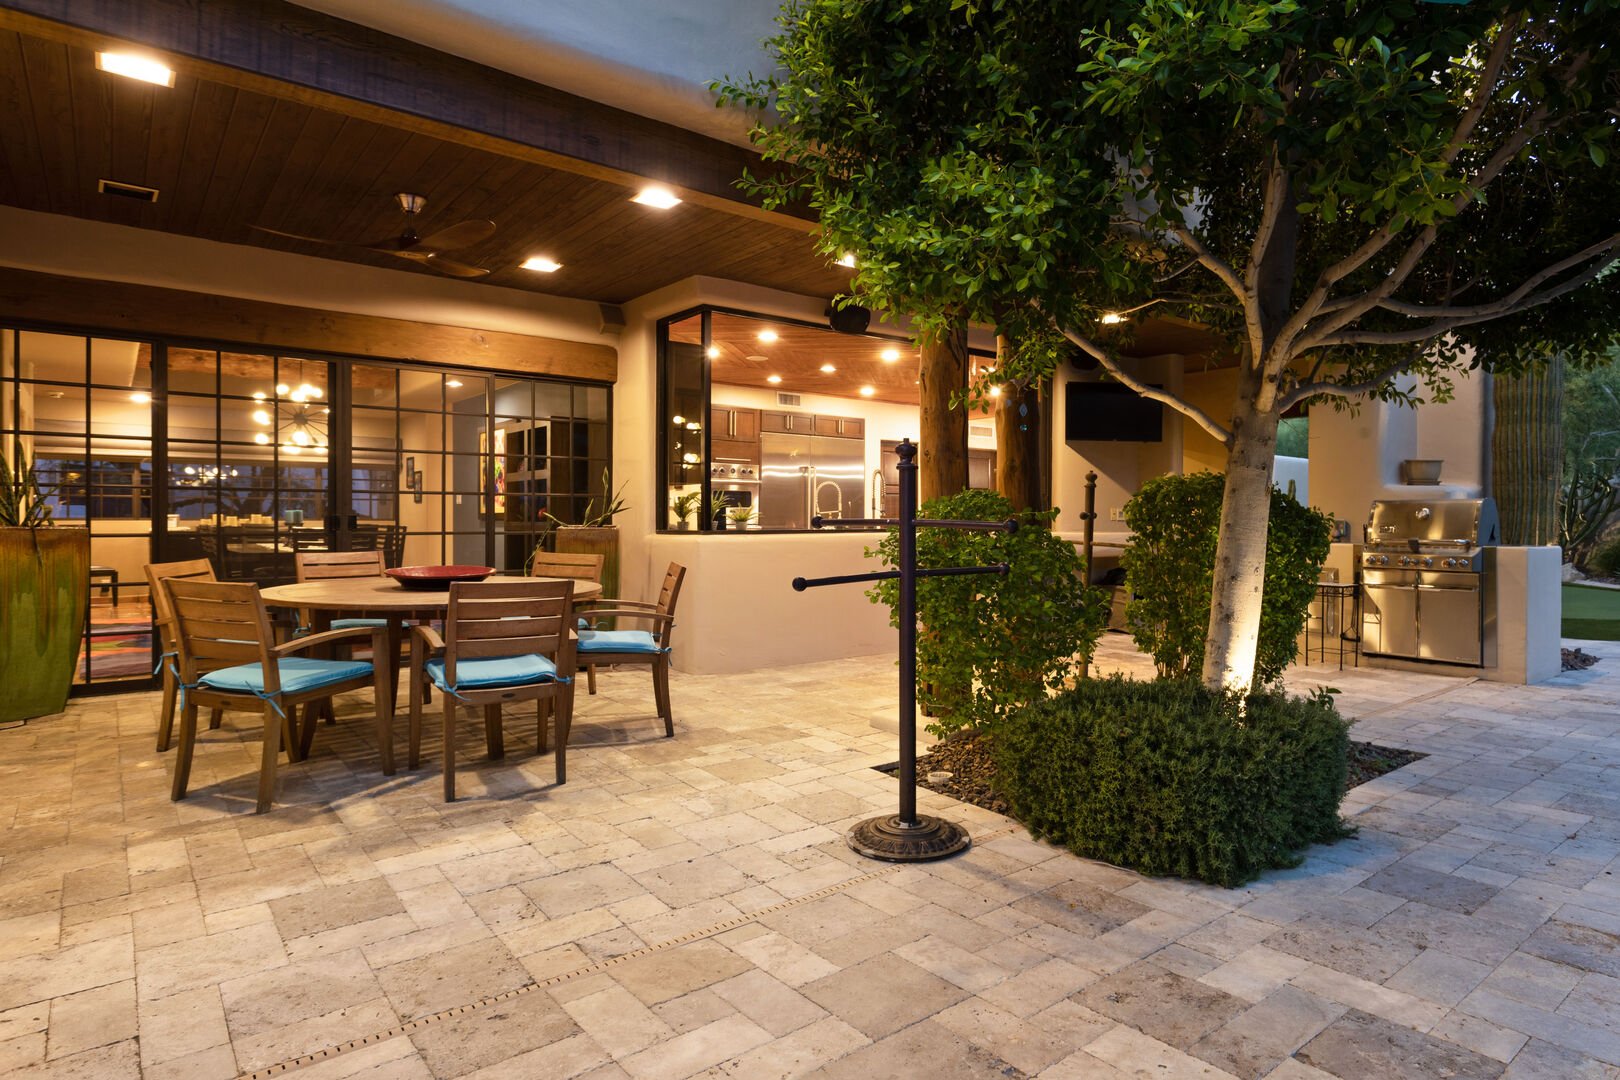 Outdoor Seating Area & Evening Lights